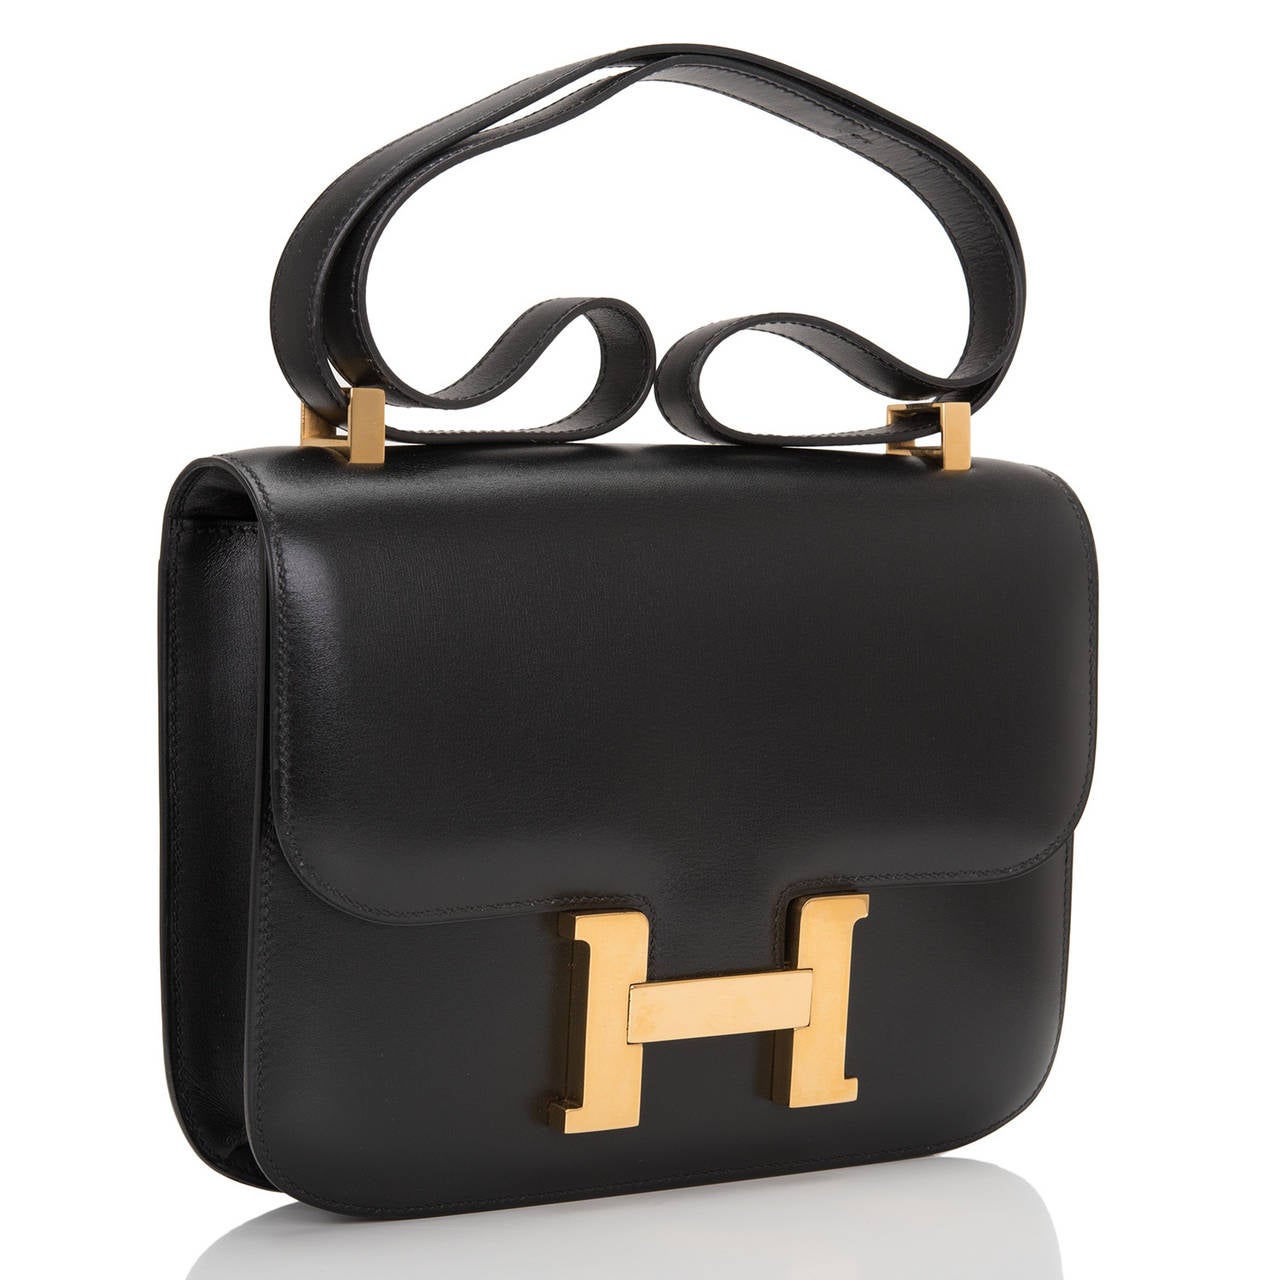 Hermes Black box leather Constance 23cm with gold hardware.

This vintage Hermes Constance features tonal stitching, smooth calfskin leather, a metal 